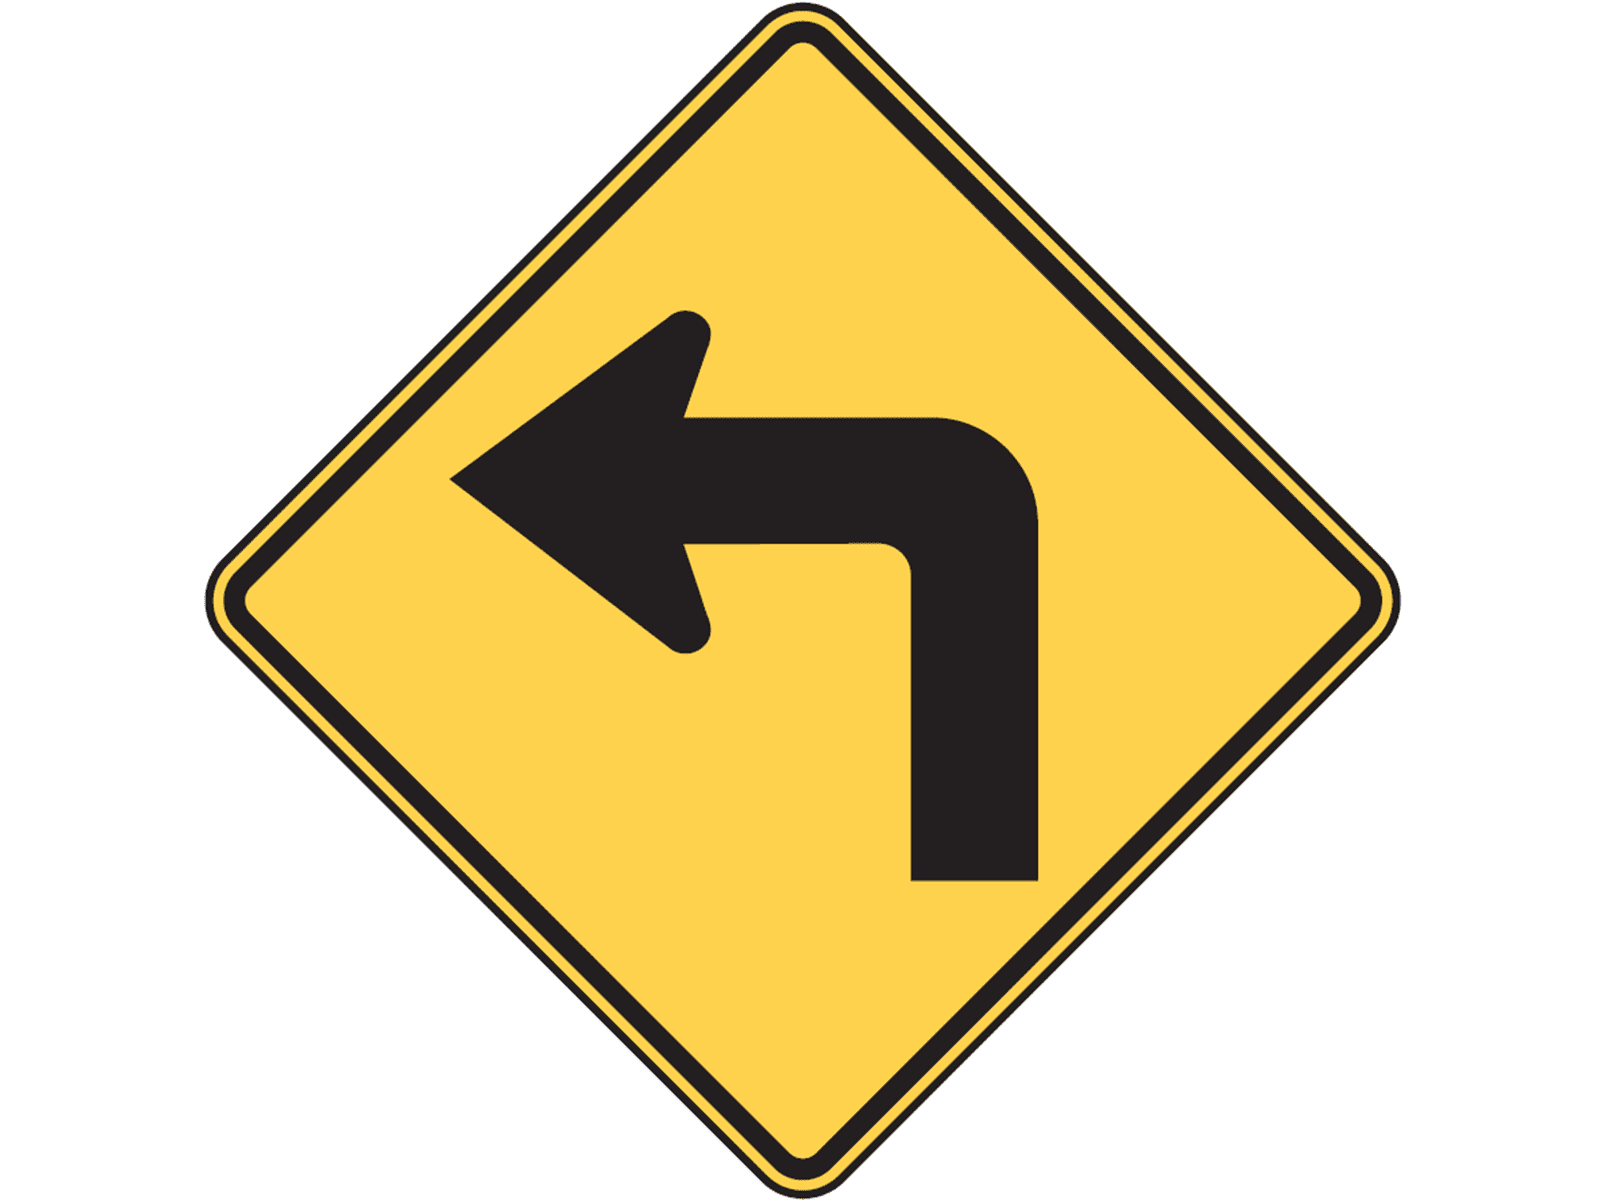 Sharp Left Turn W1-1 - W1: Curves and Turns